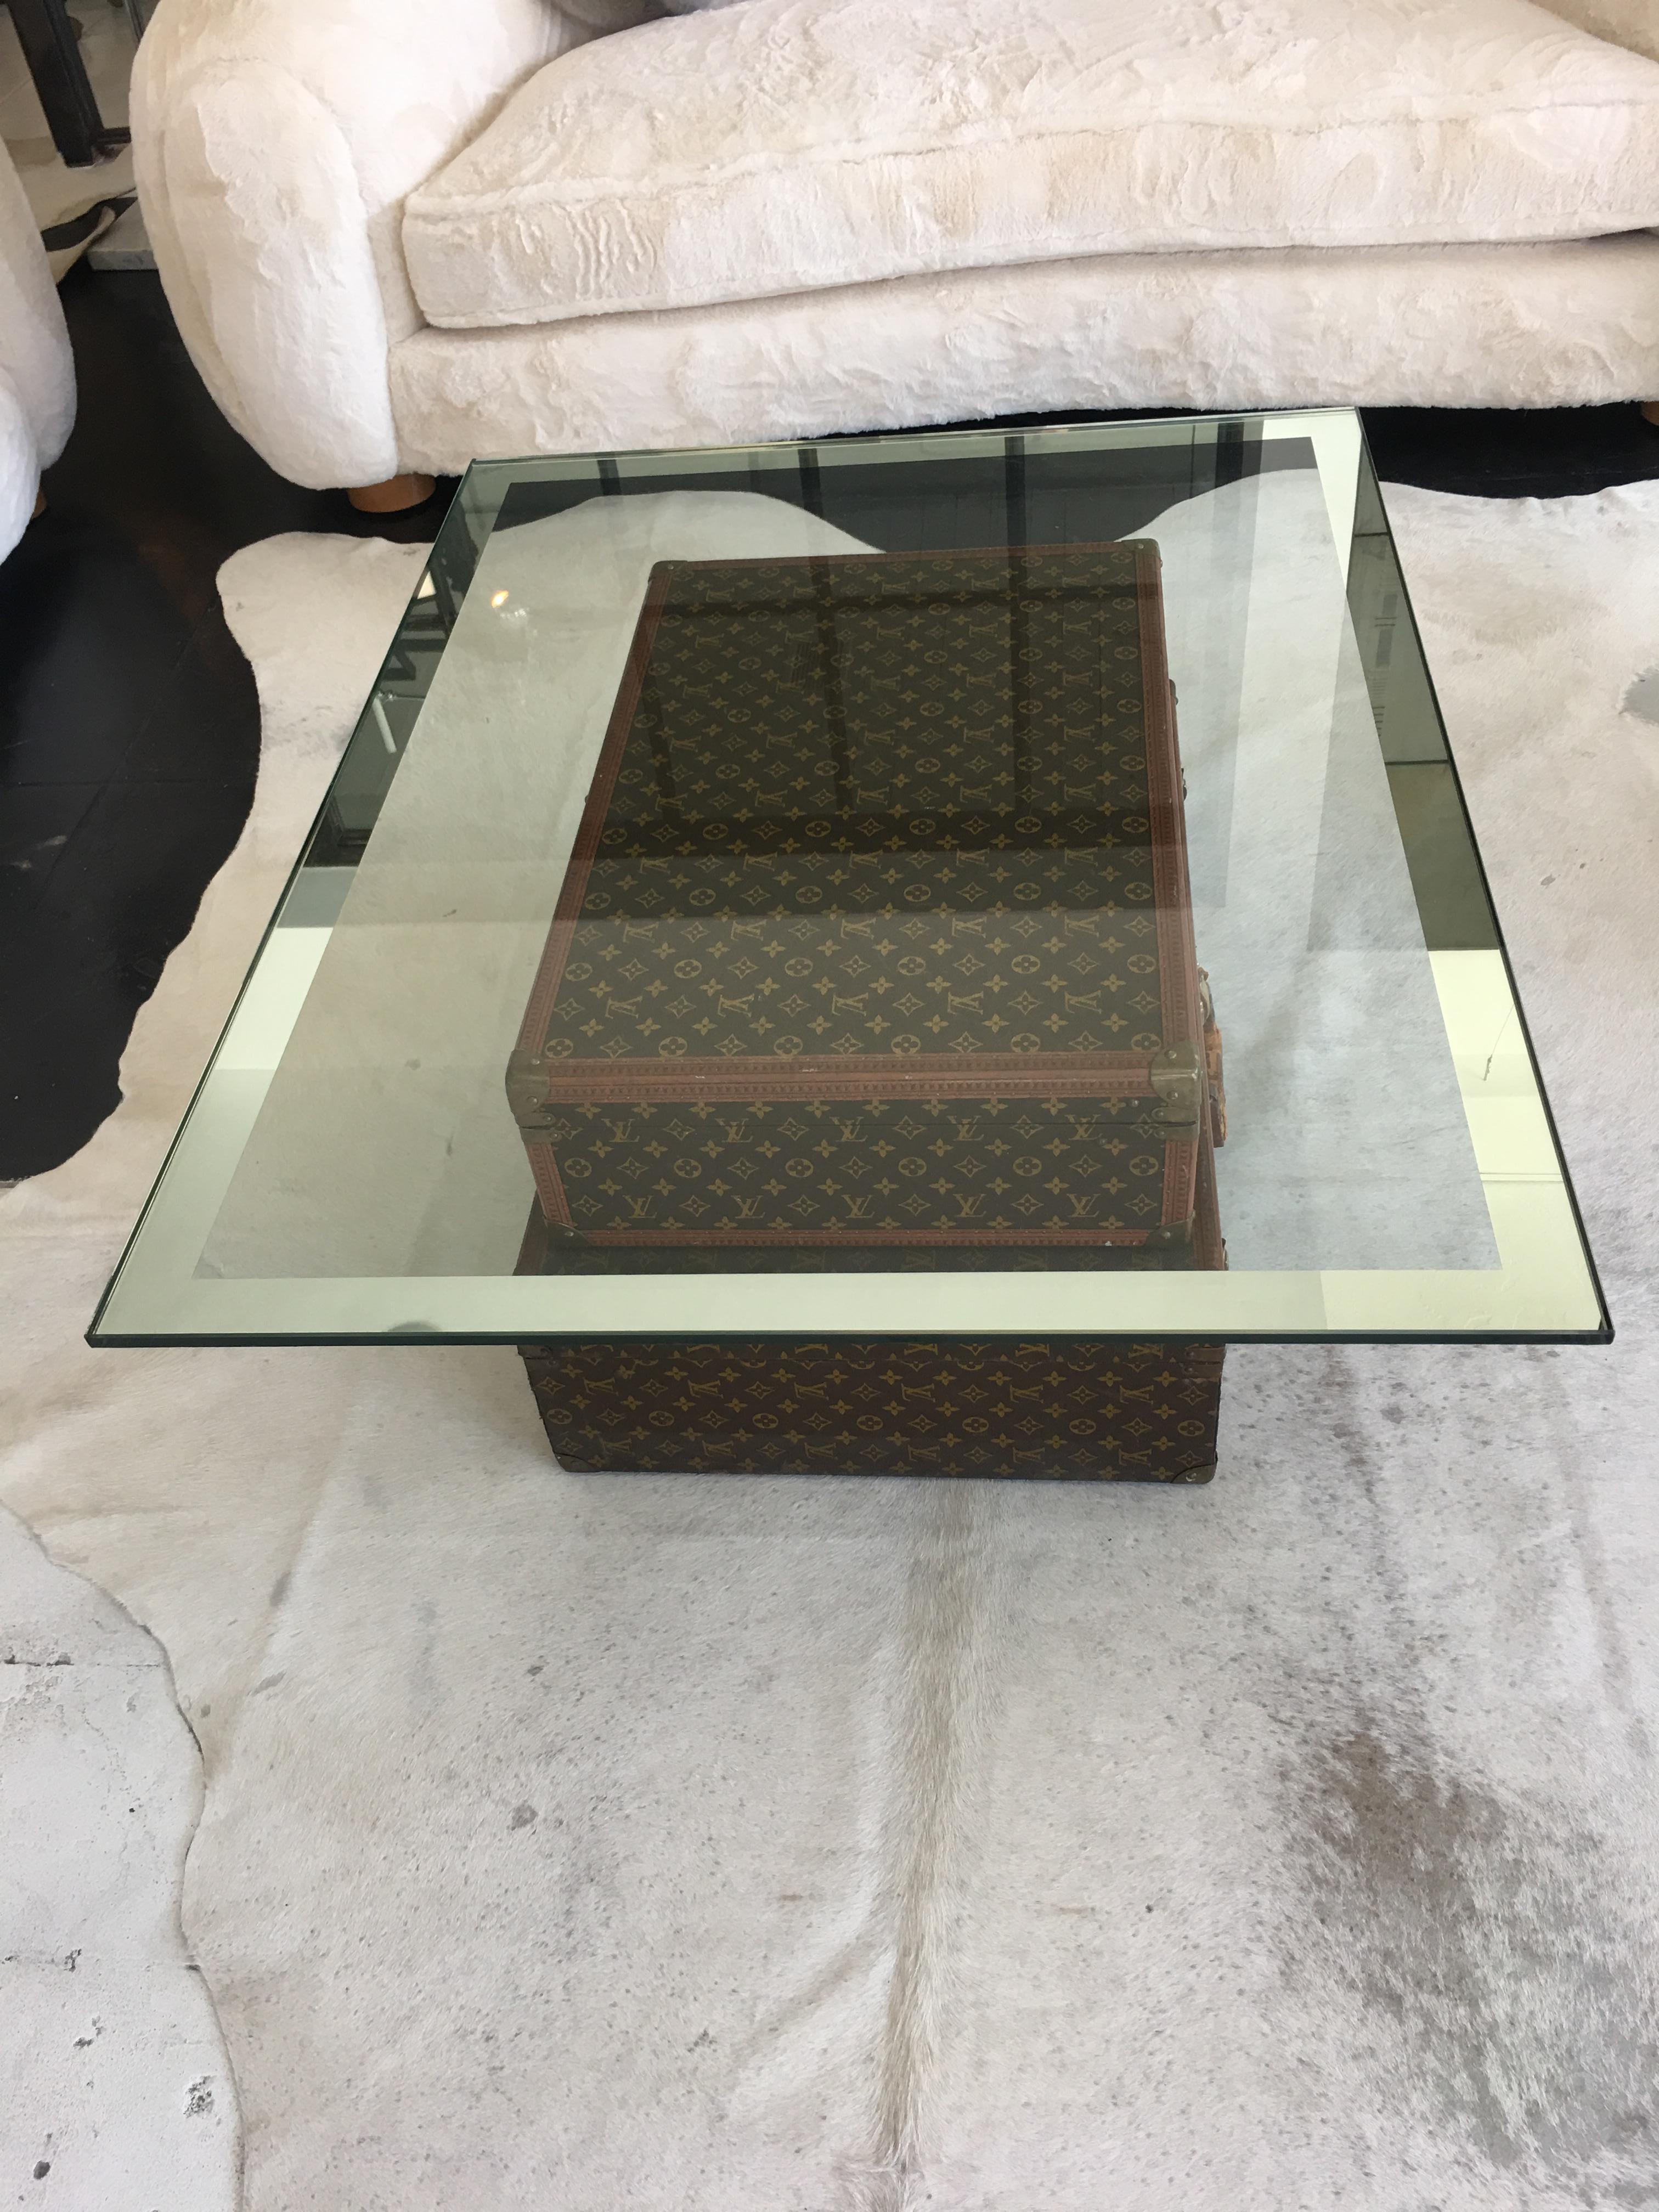 Two vintage 1950s Louis Vuitton trunks converted into a coffee table. Half-inch thick glass top with 2-inch mirror border.